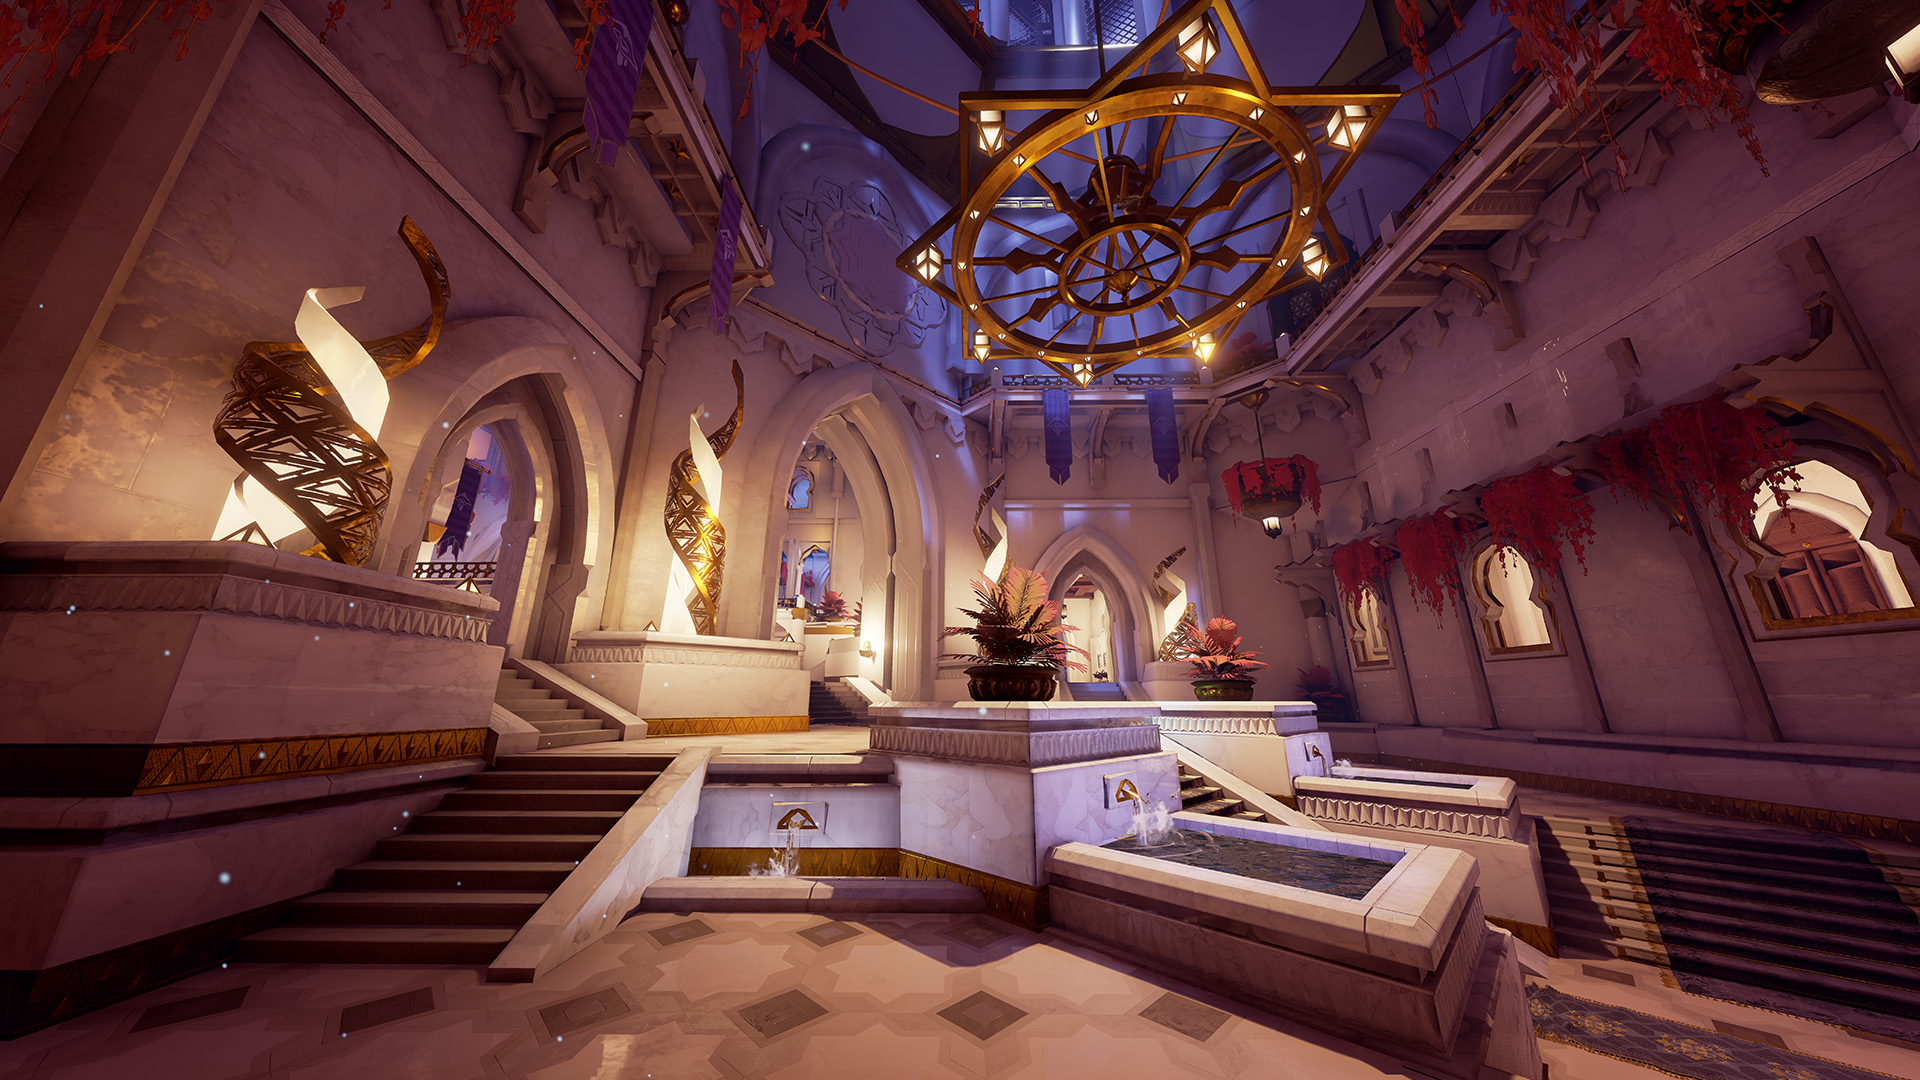 Media asset in full size related to 3dfxzone.it news item entitled as follows: Gameplay trailer del first-person shooter Mirage: Arcane Warfare | Image Name: news24879_Mirage-Arcane-Warfare_2.jpg